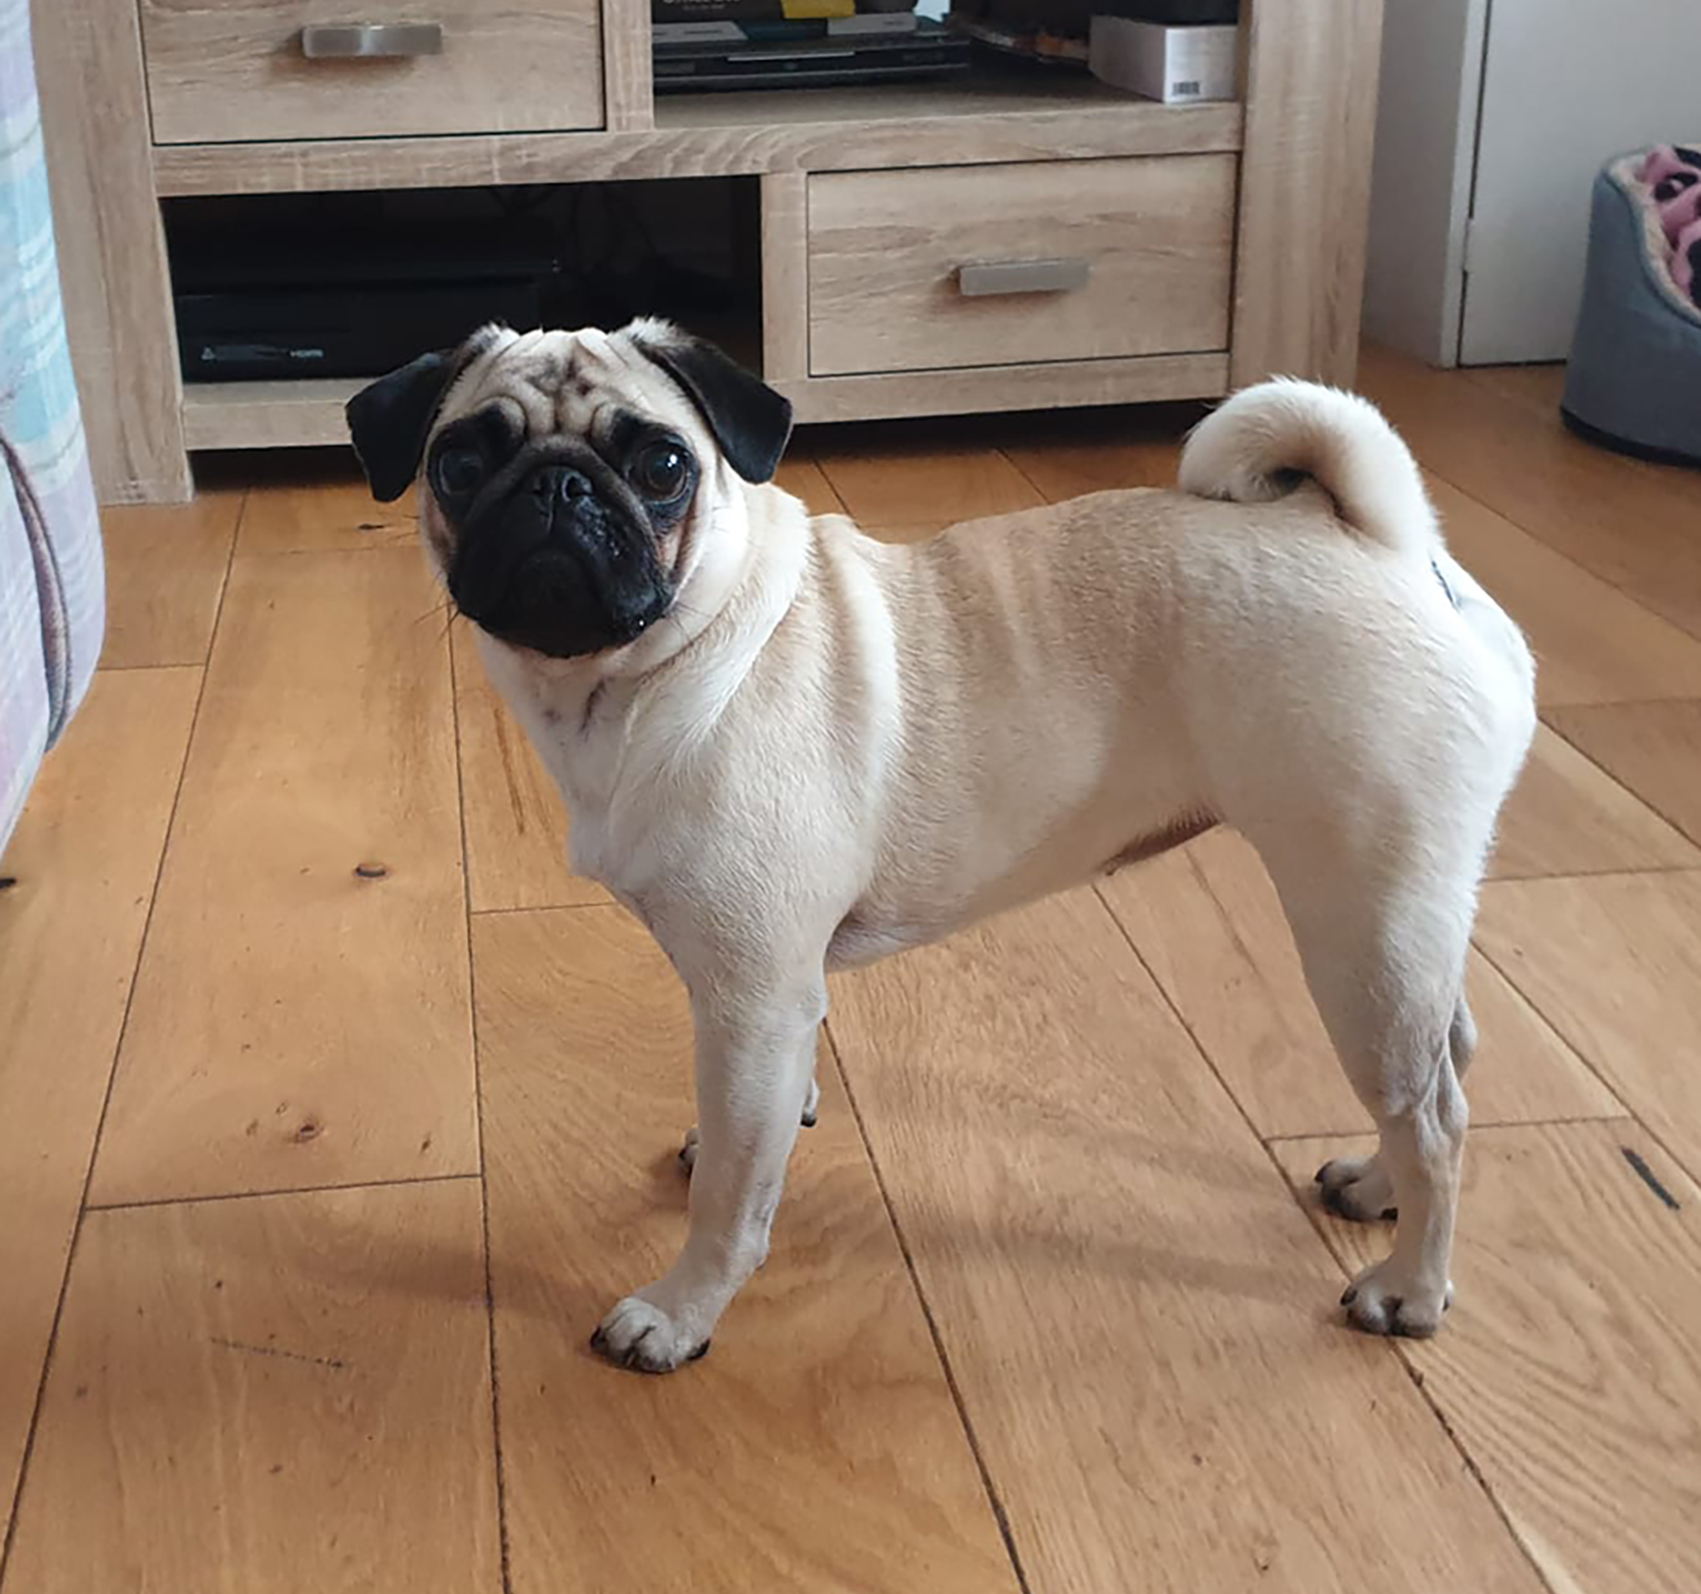 Lovely Lottie the pug finds a home - image Susie on https://pugprotectiontrust.org